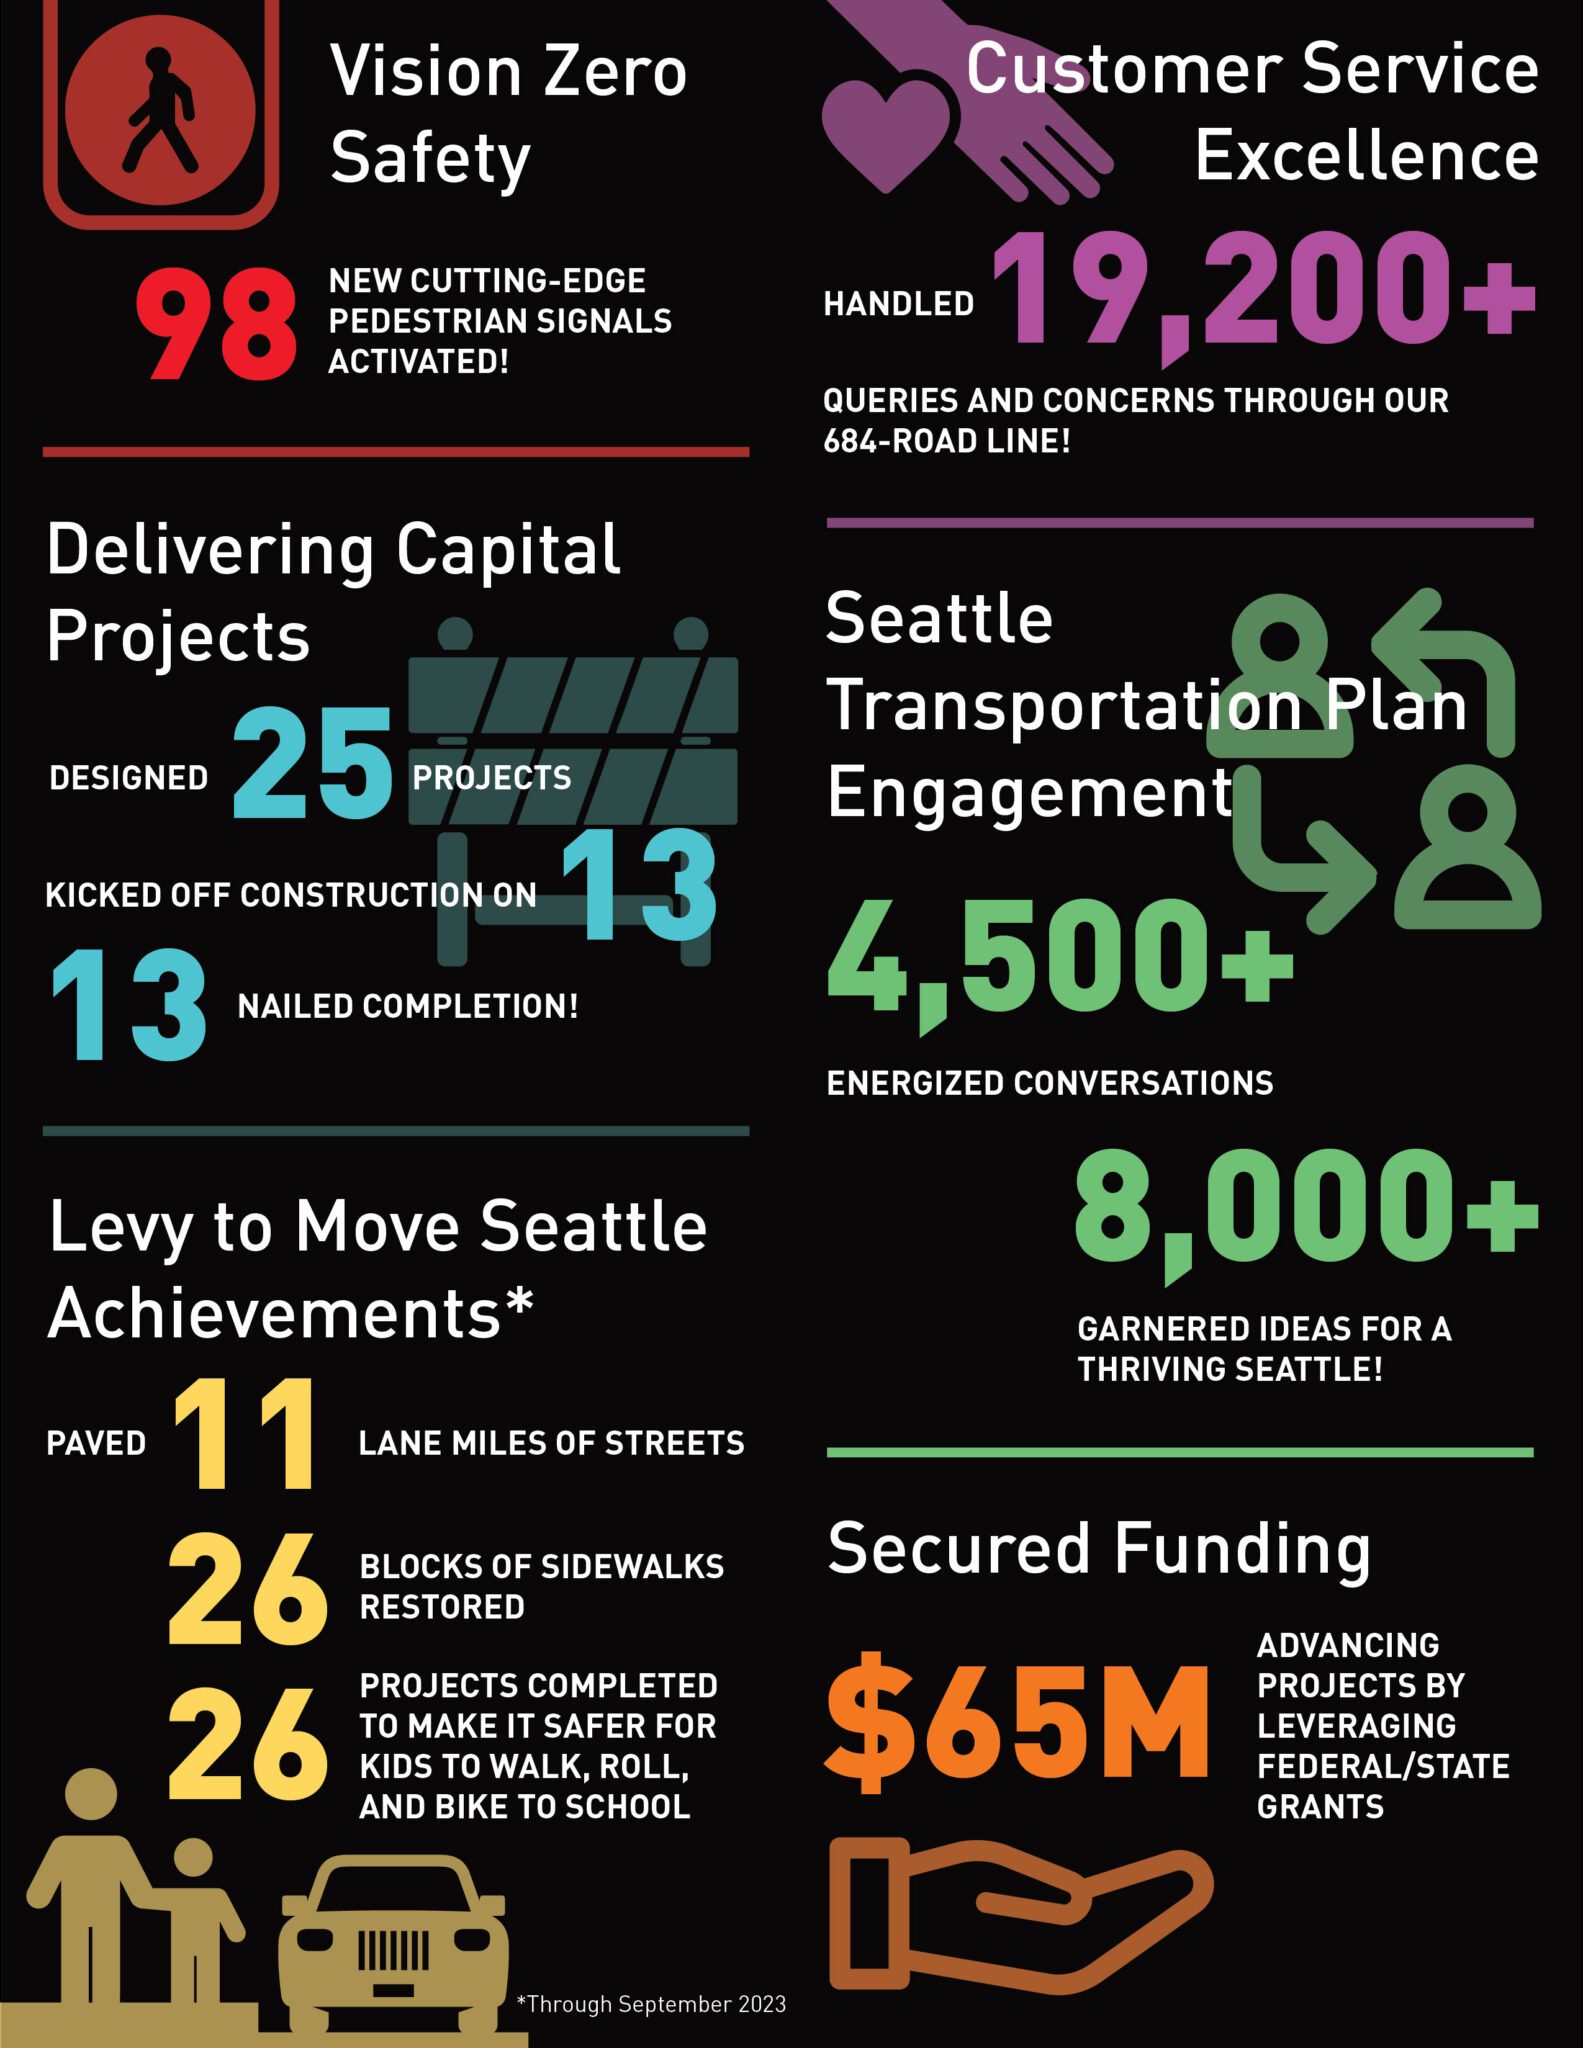 A by the numbers highlight of SDOT's key activities in 2023, including 98 pedestrian signals activated, 19,200 customer service inquiries answered, and other key stats.